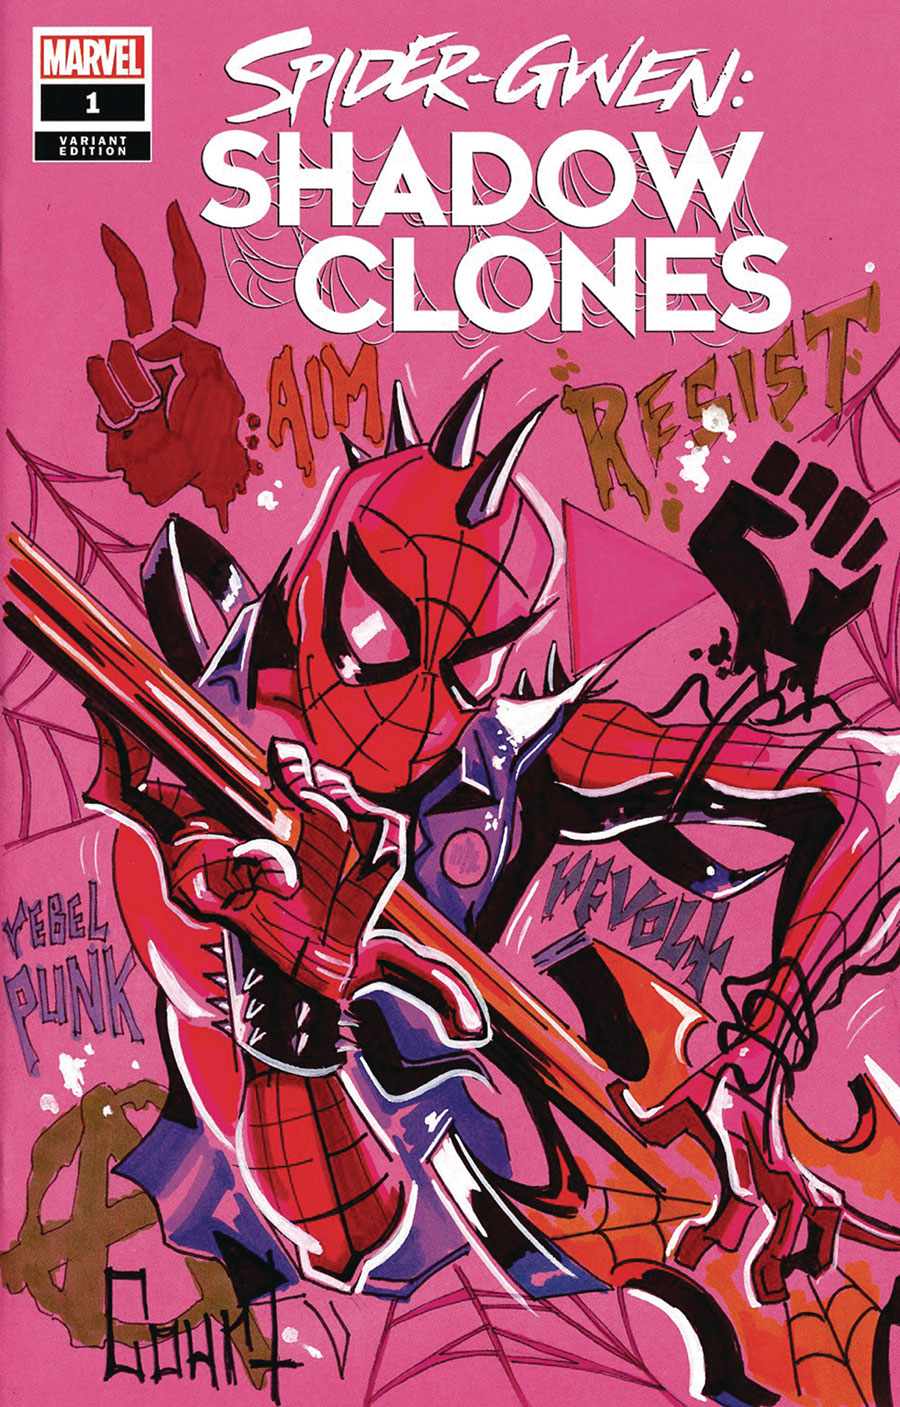 Spider-Gwen Shadow Clones #1 Cover S DF Pink Blank Variant Cover Spider-Punk Hand-Drawn Sketch By Jessica Court